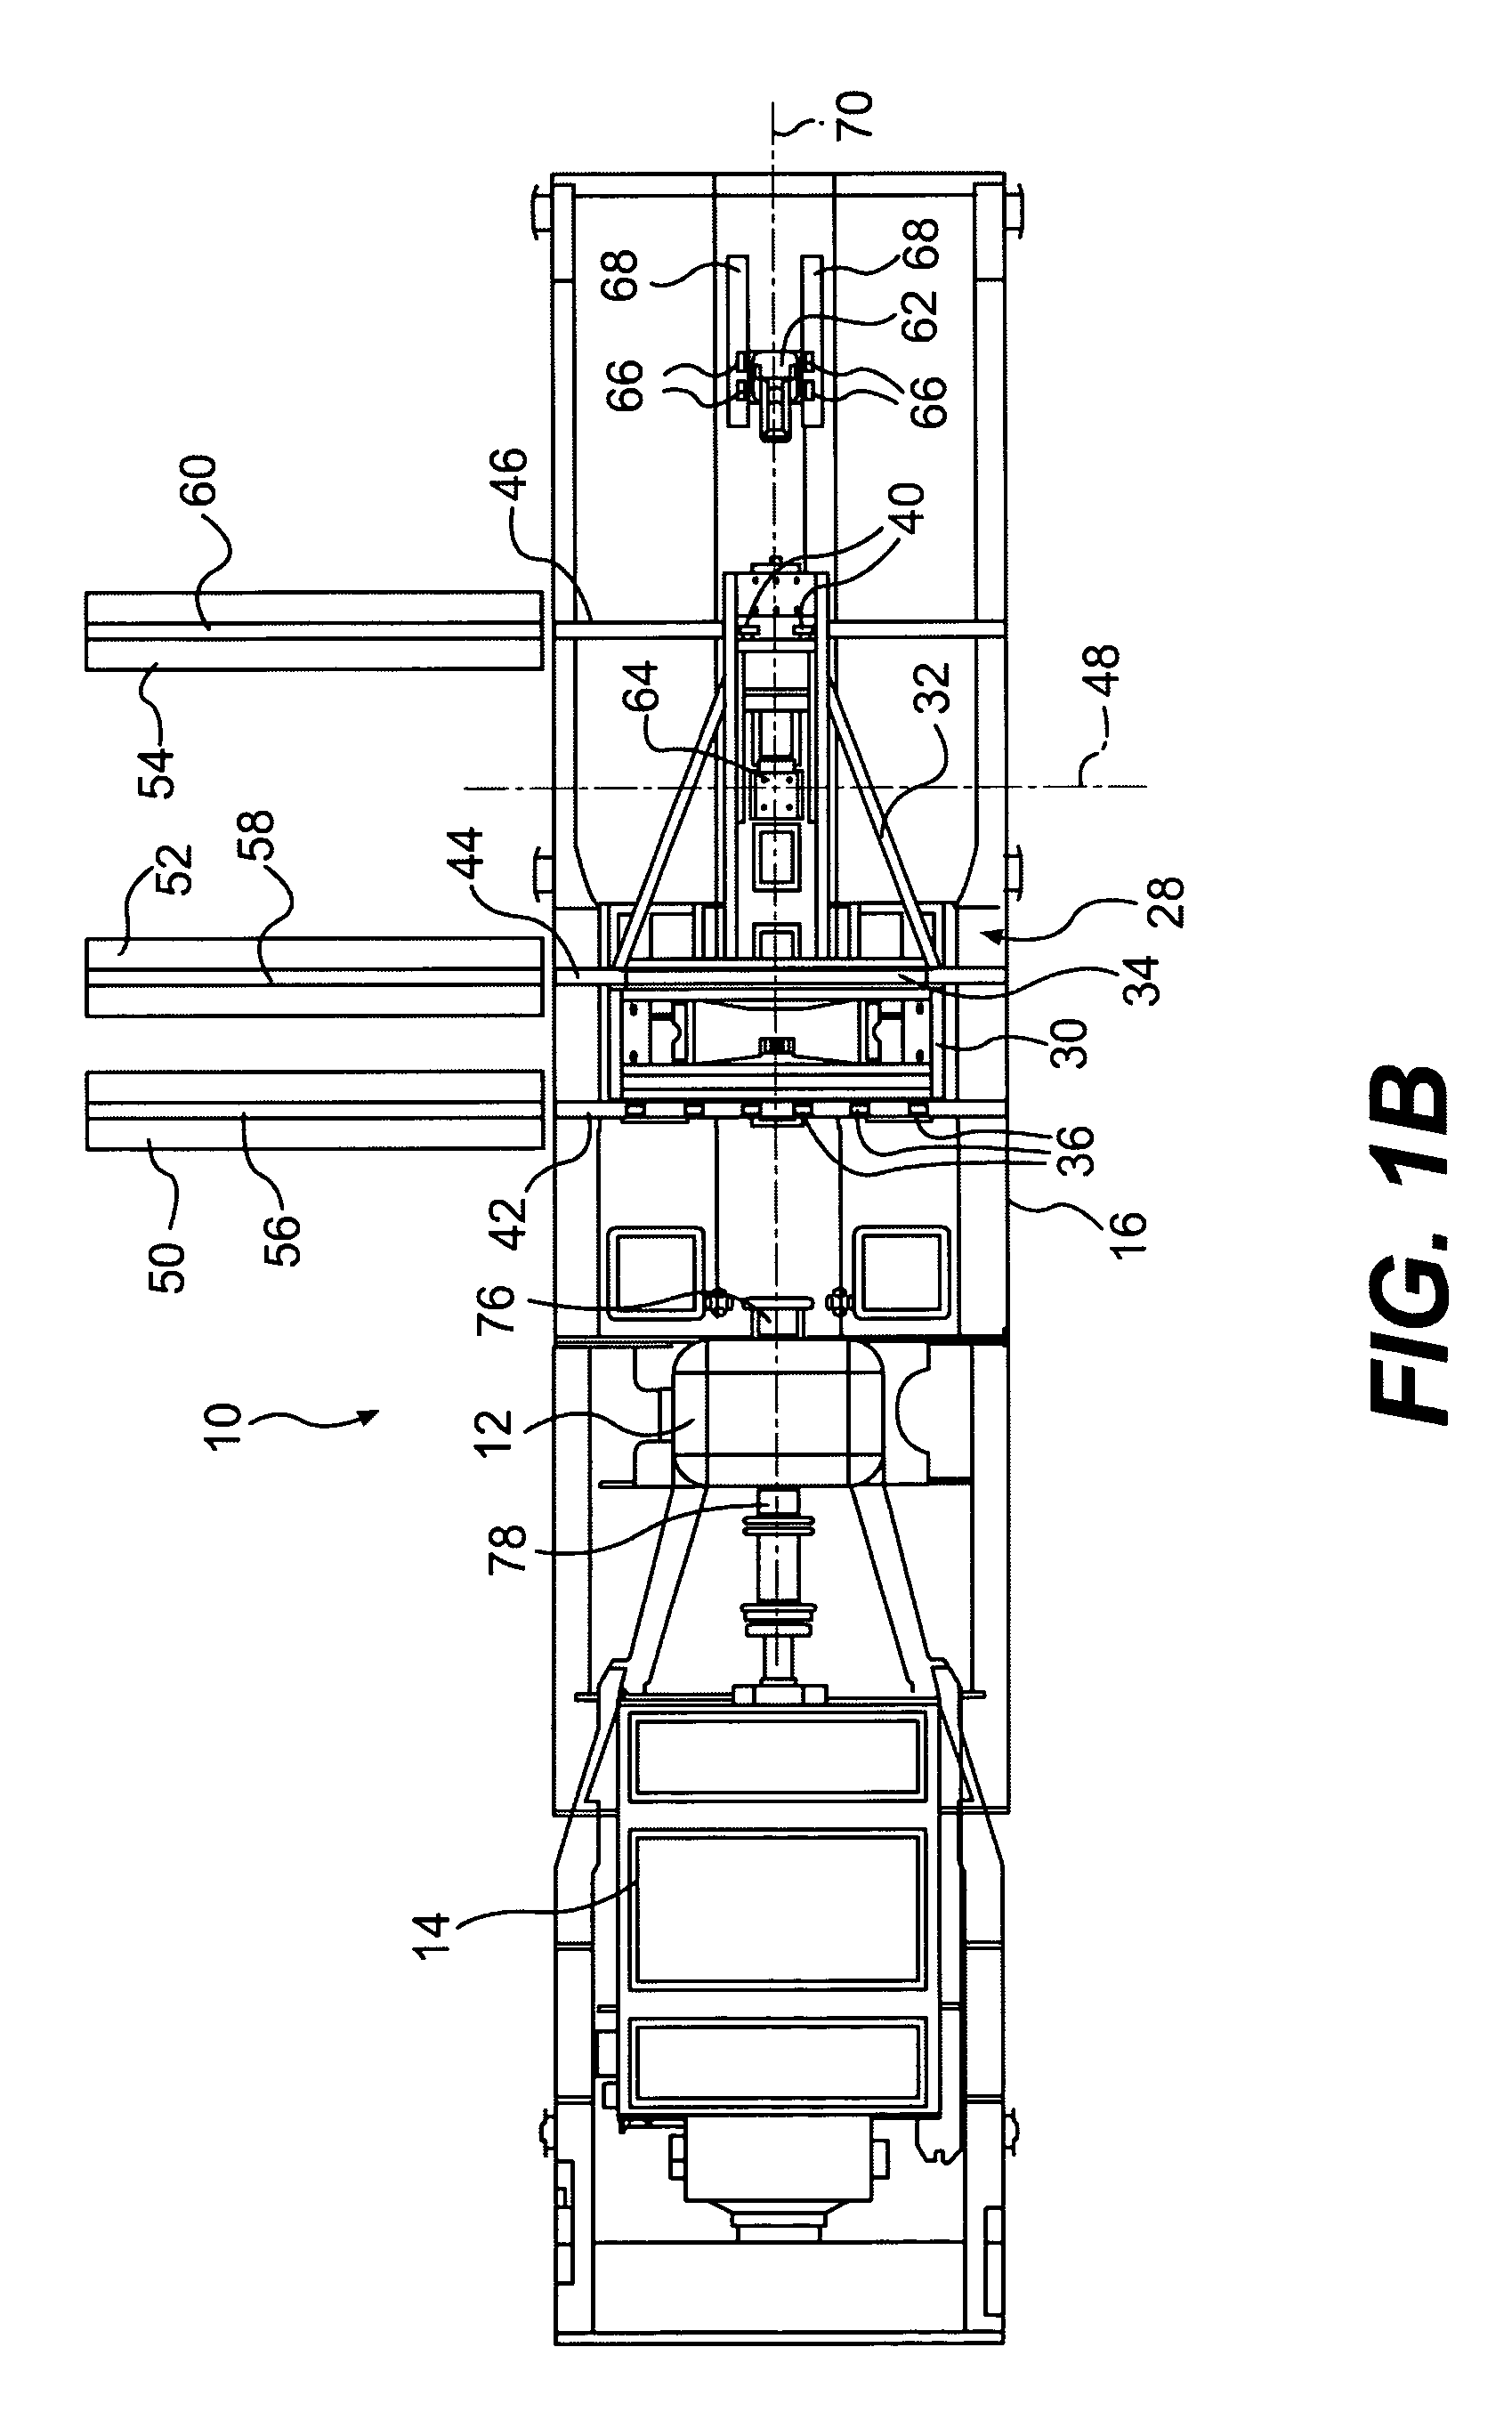 System for supporting and servicing a gas turbine engine